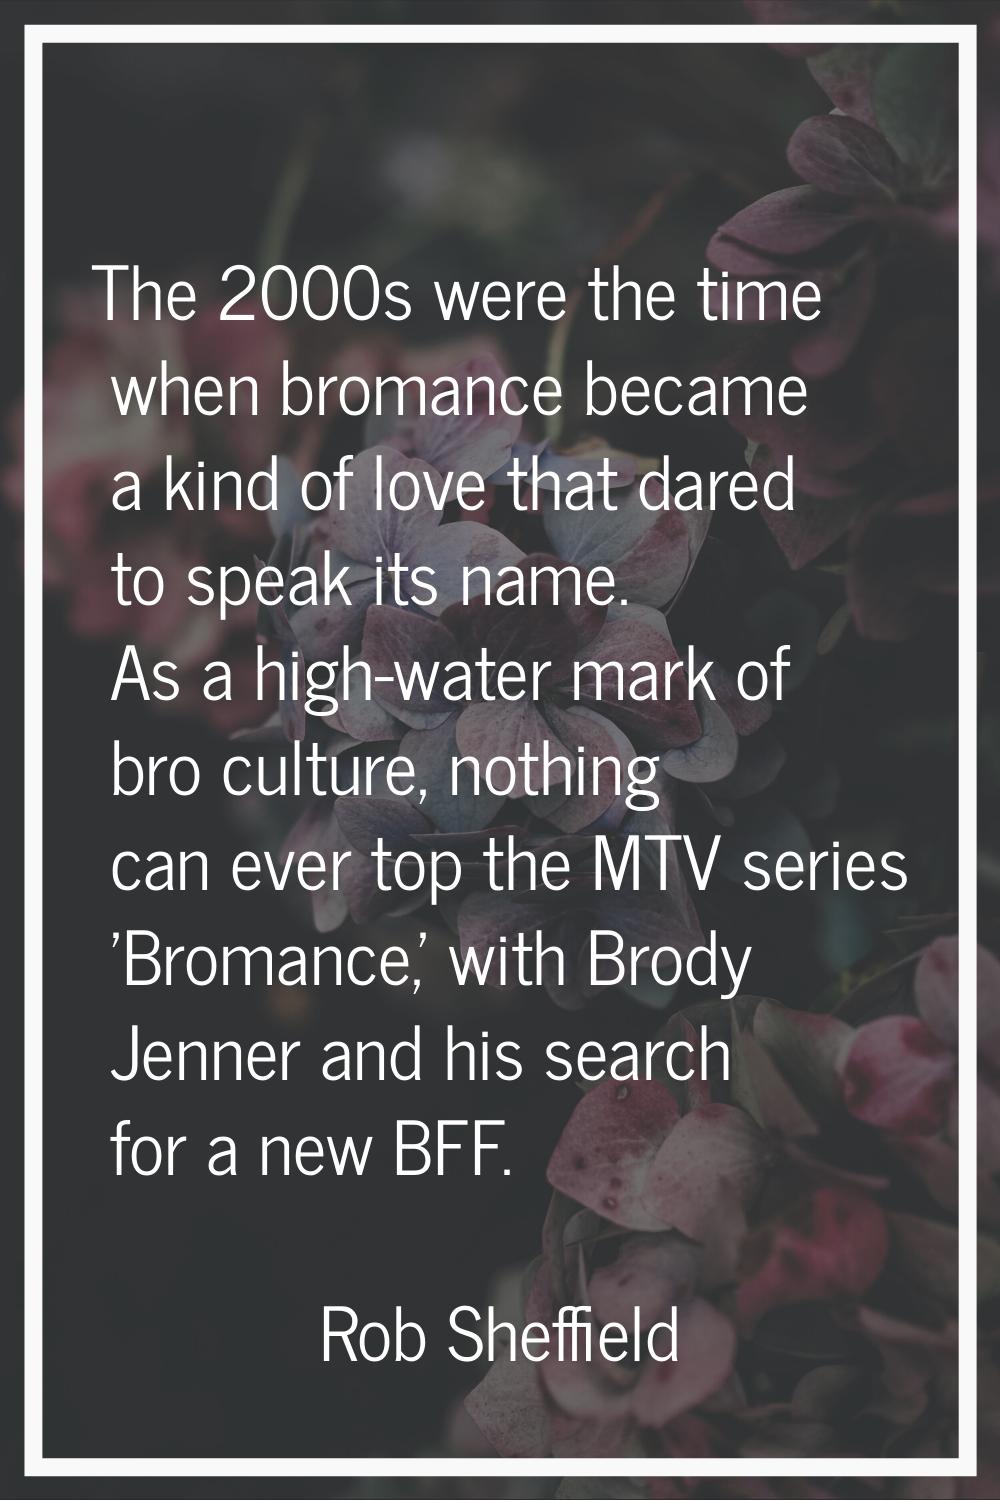 The 2000s were the time when bromance became a kind of love that dared to speak its name. As a high